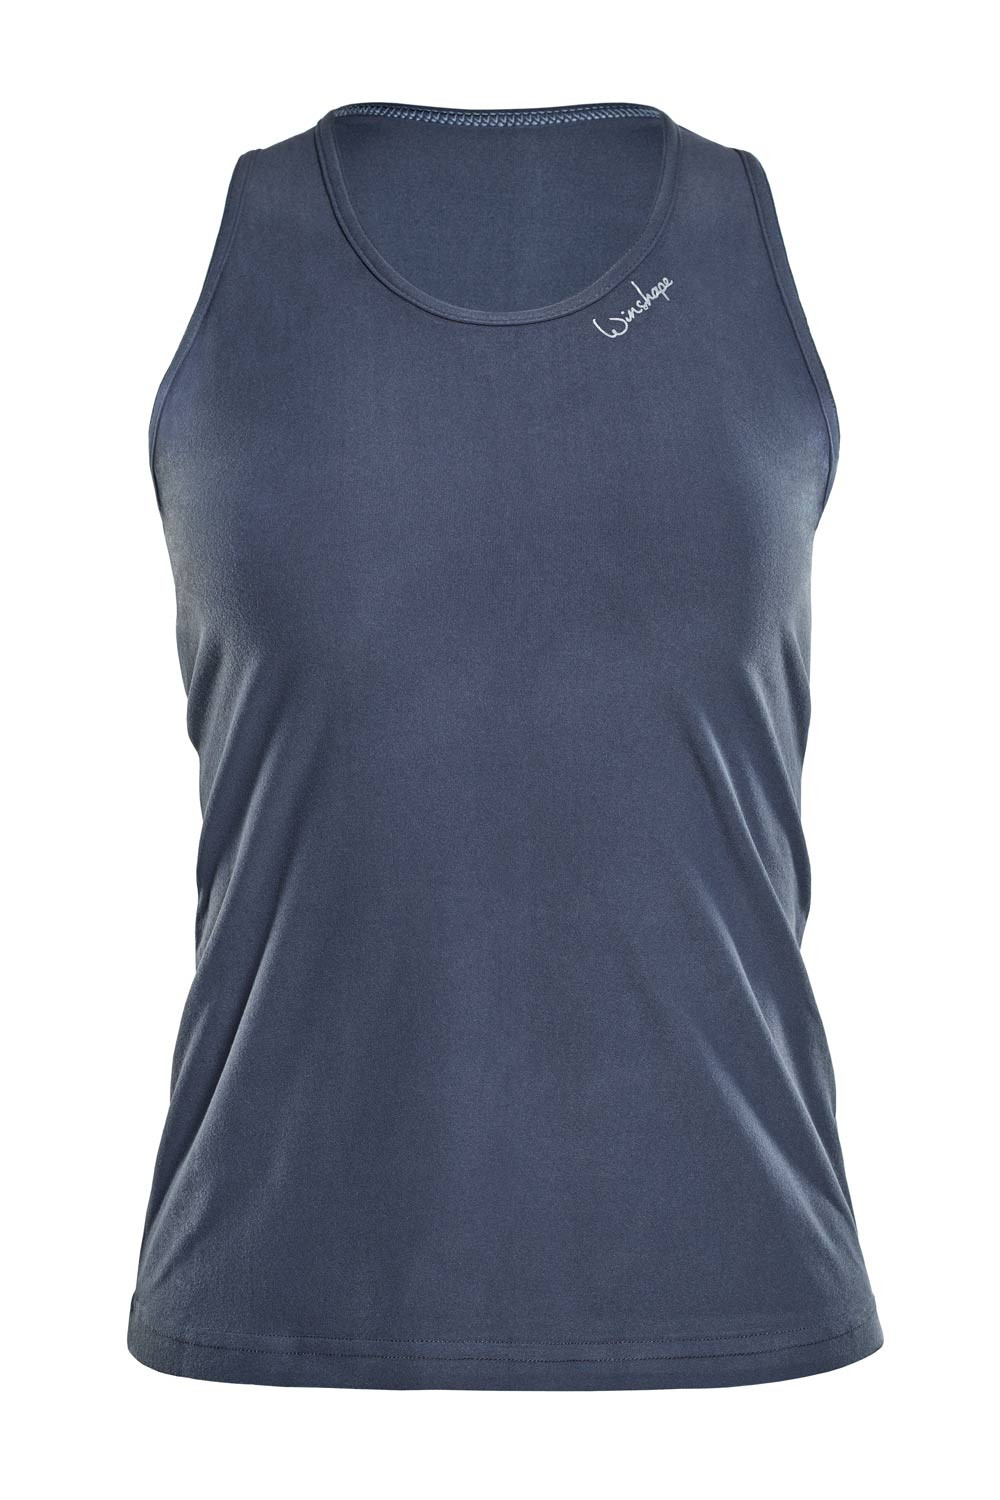 Functional Light and Soft AET124LS, Style Soft anthrazit, Ultra Tanktop Winshape